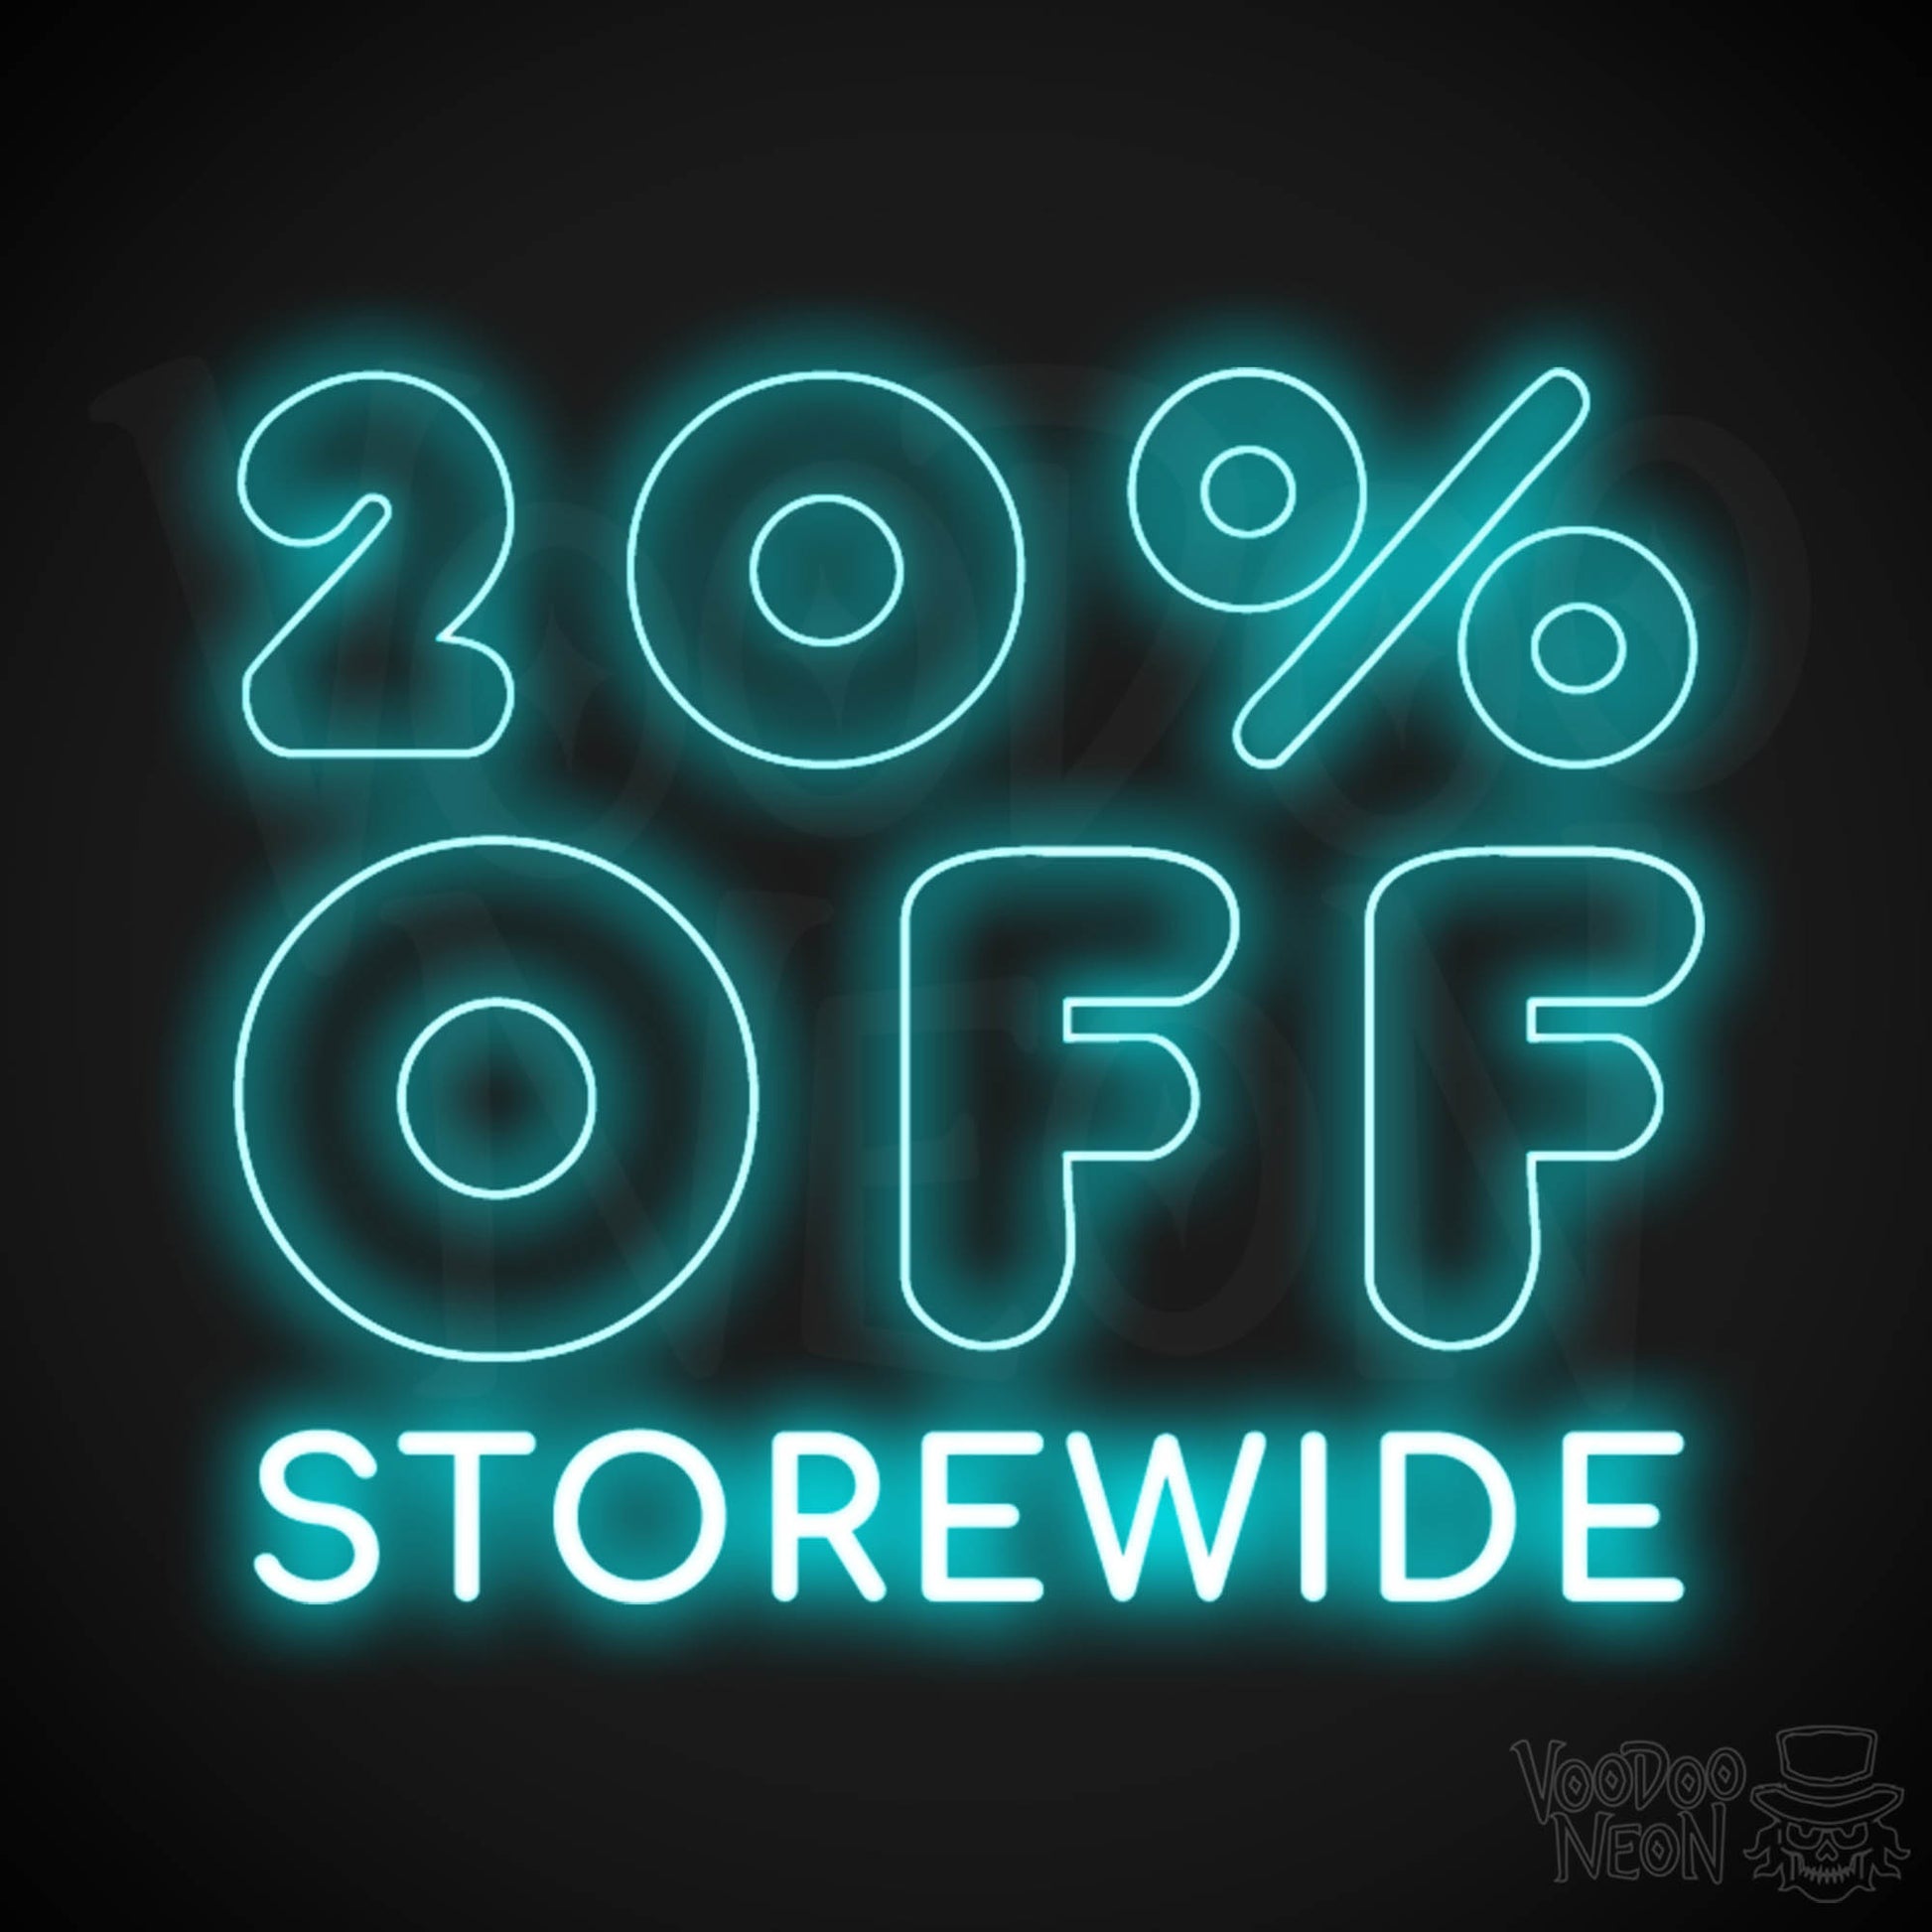 20% Off Storewide Neon Sign - 20% Off Storewide Sign - LED Shop Sign - Color Ice Blue